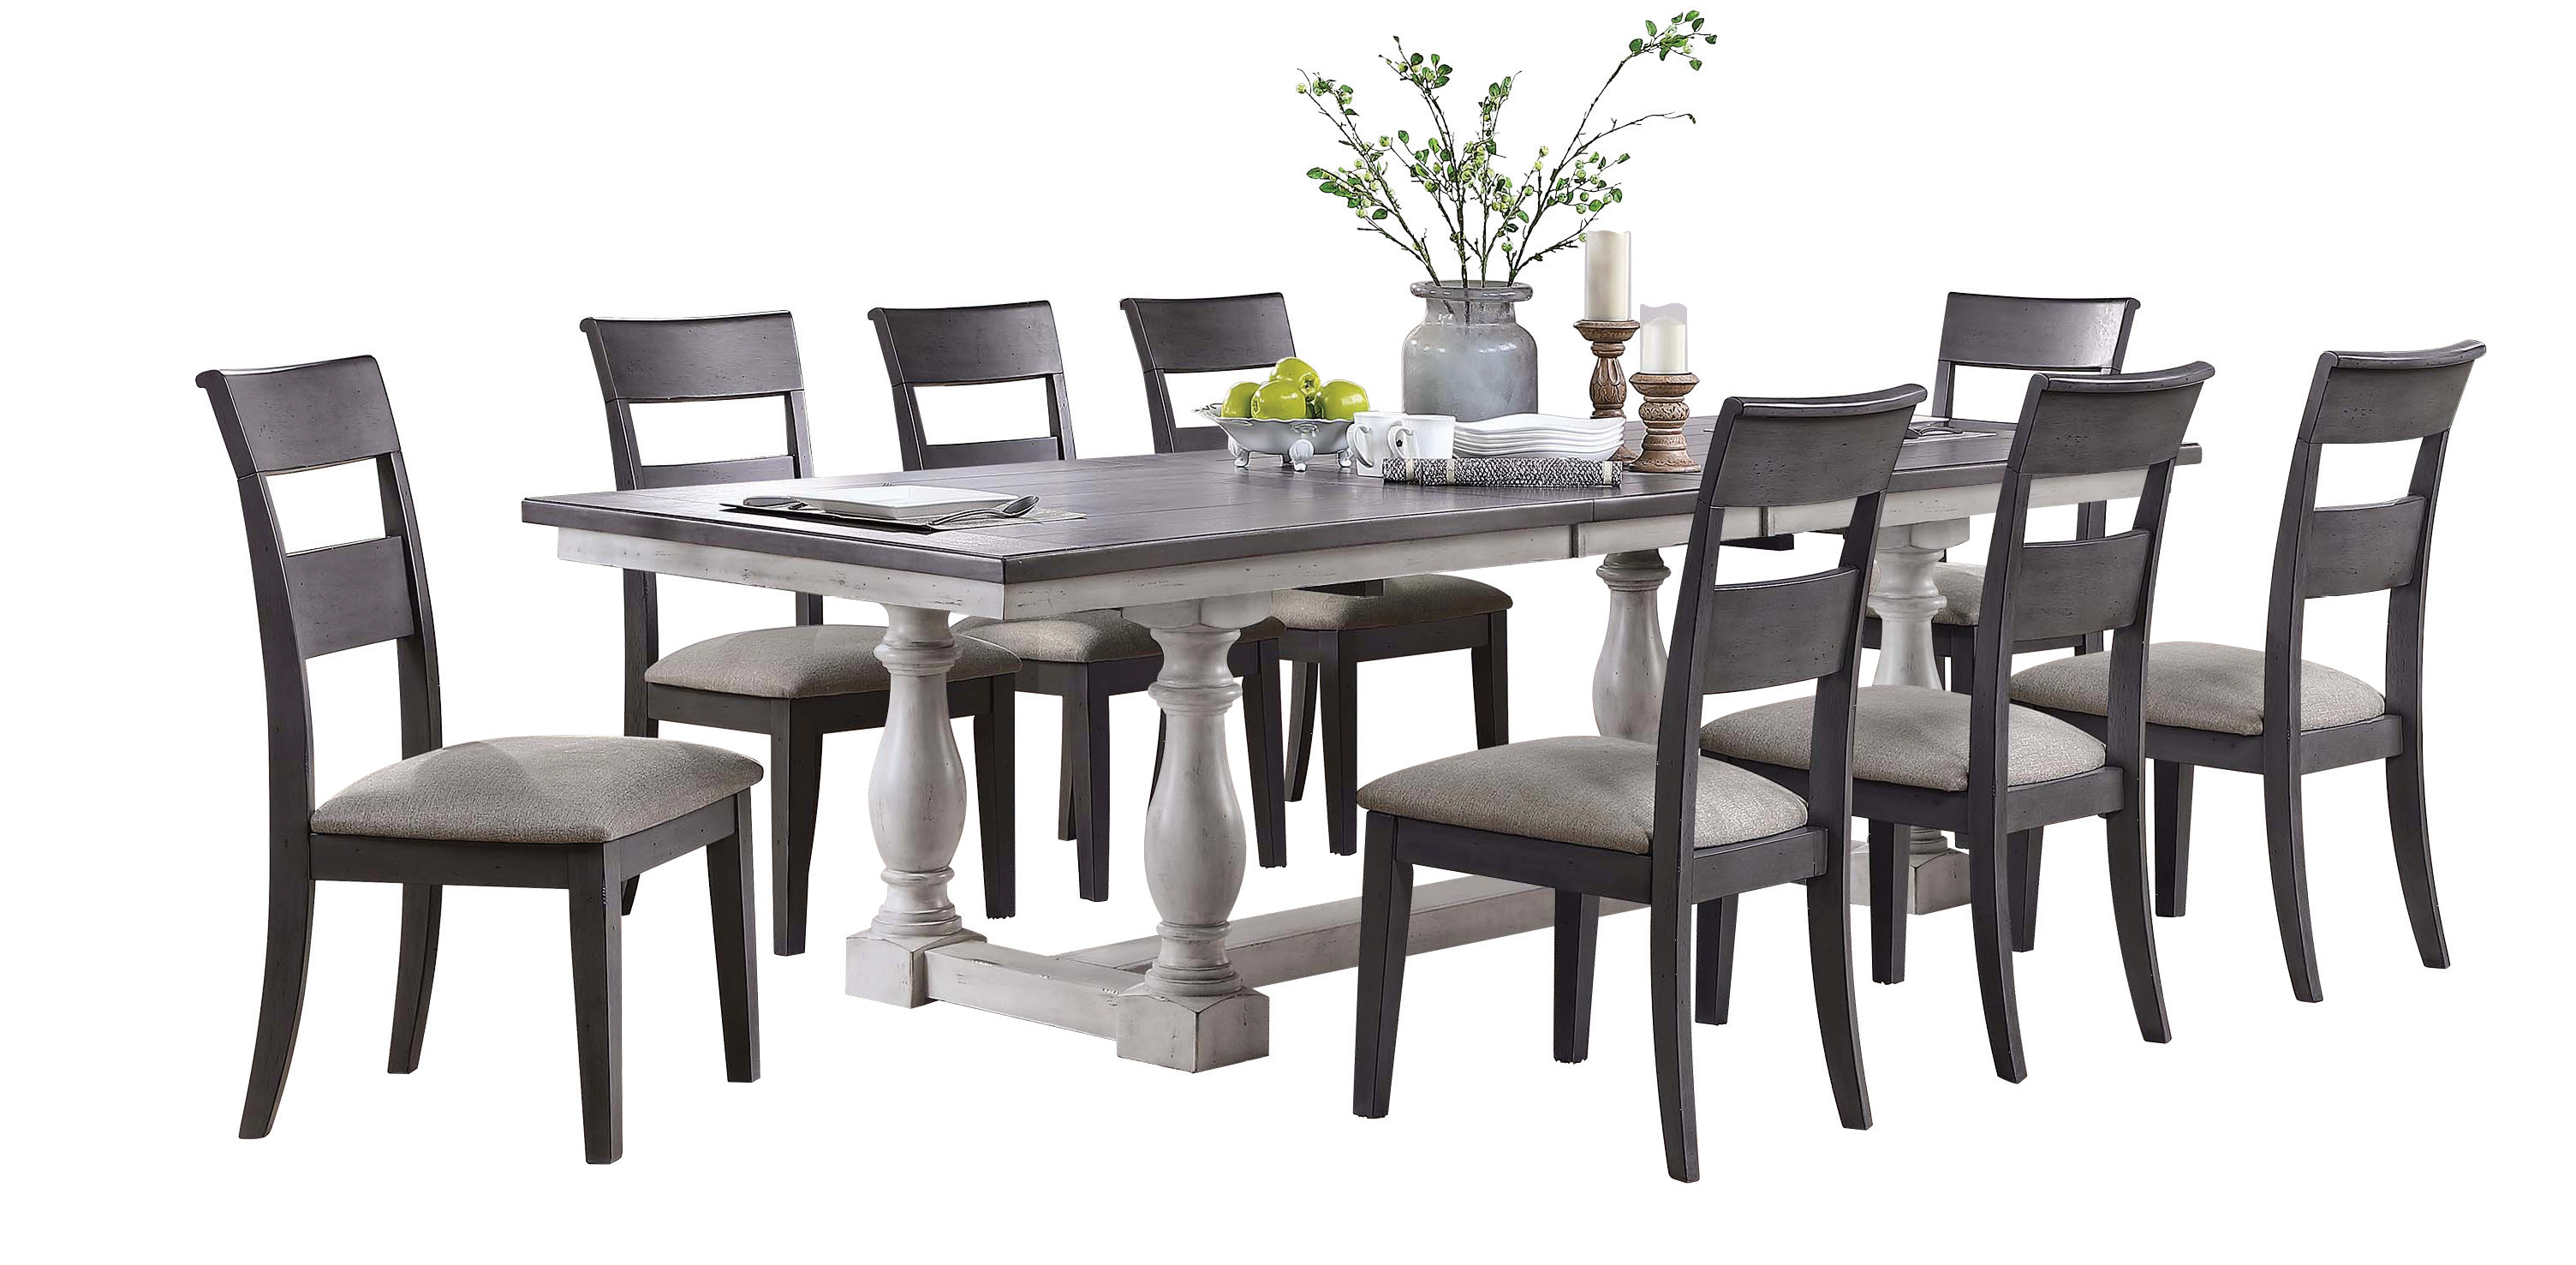 Whalen Recalls Bayside Furnishings 9 Piece Dining Sets Due To Fall Hazard Sold Exclusively At Costco Recall Alert Cpscgov